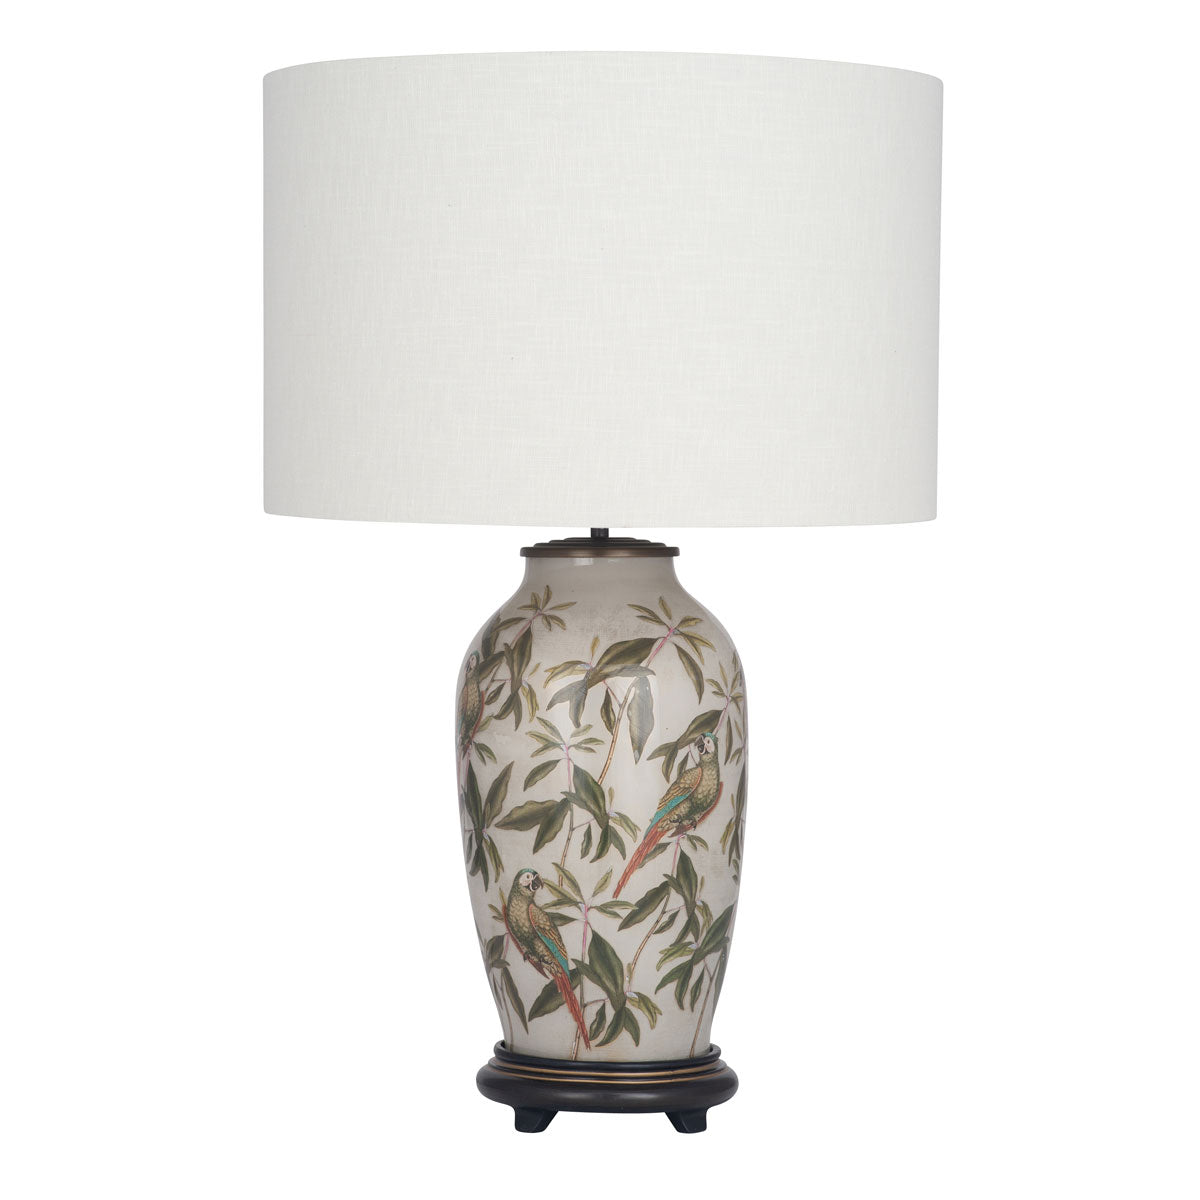 Table lamp with birds and leaves is shown here with a cylinder lampshade